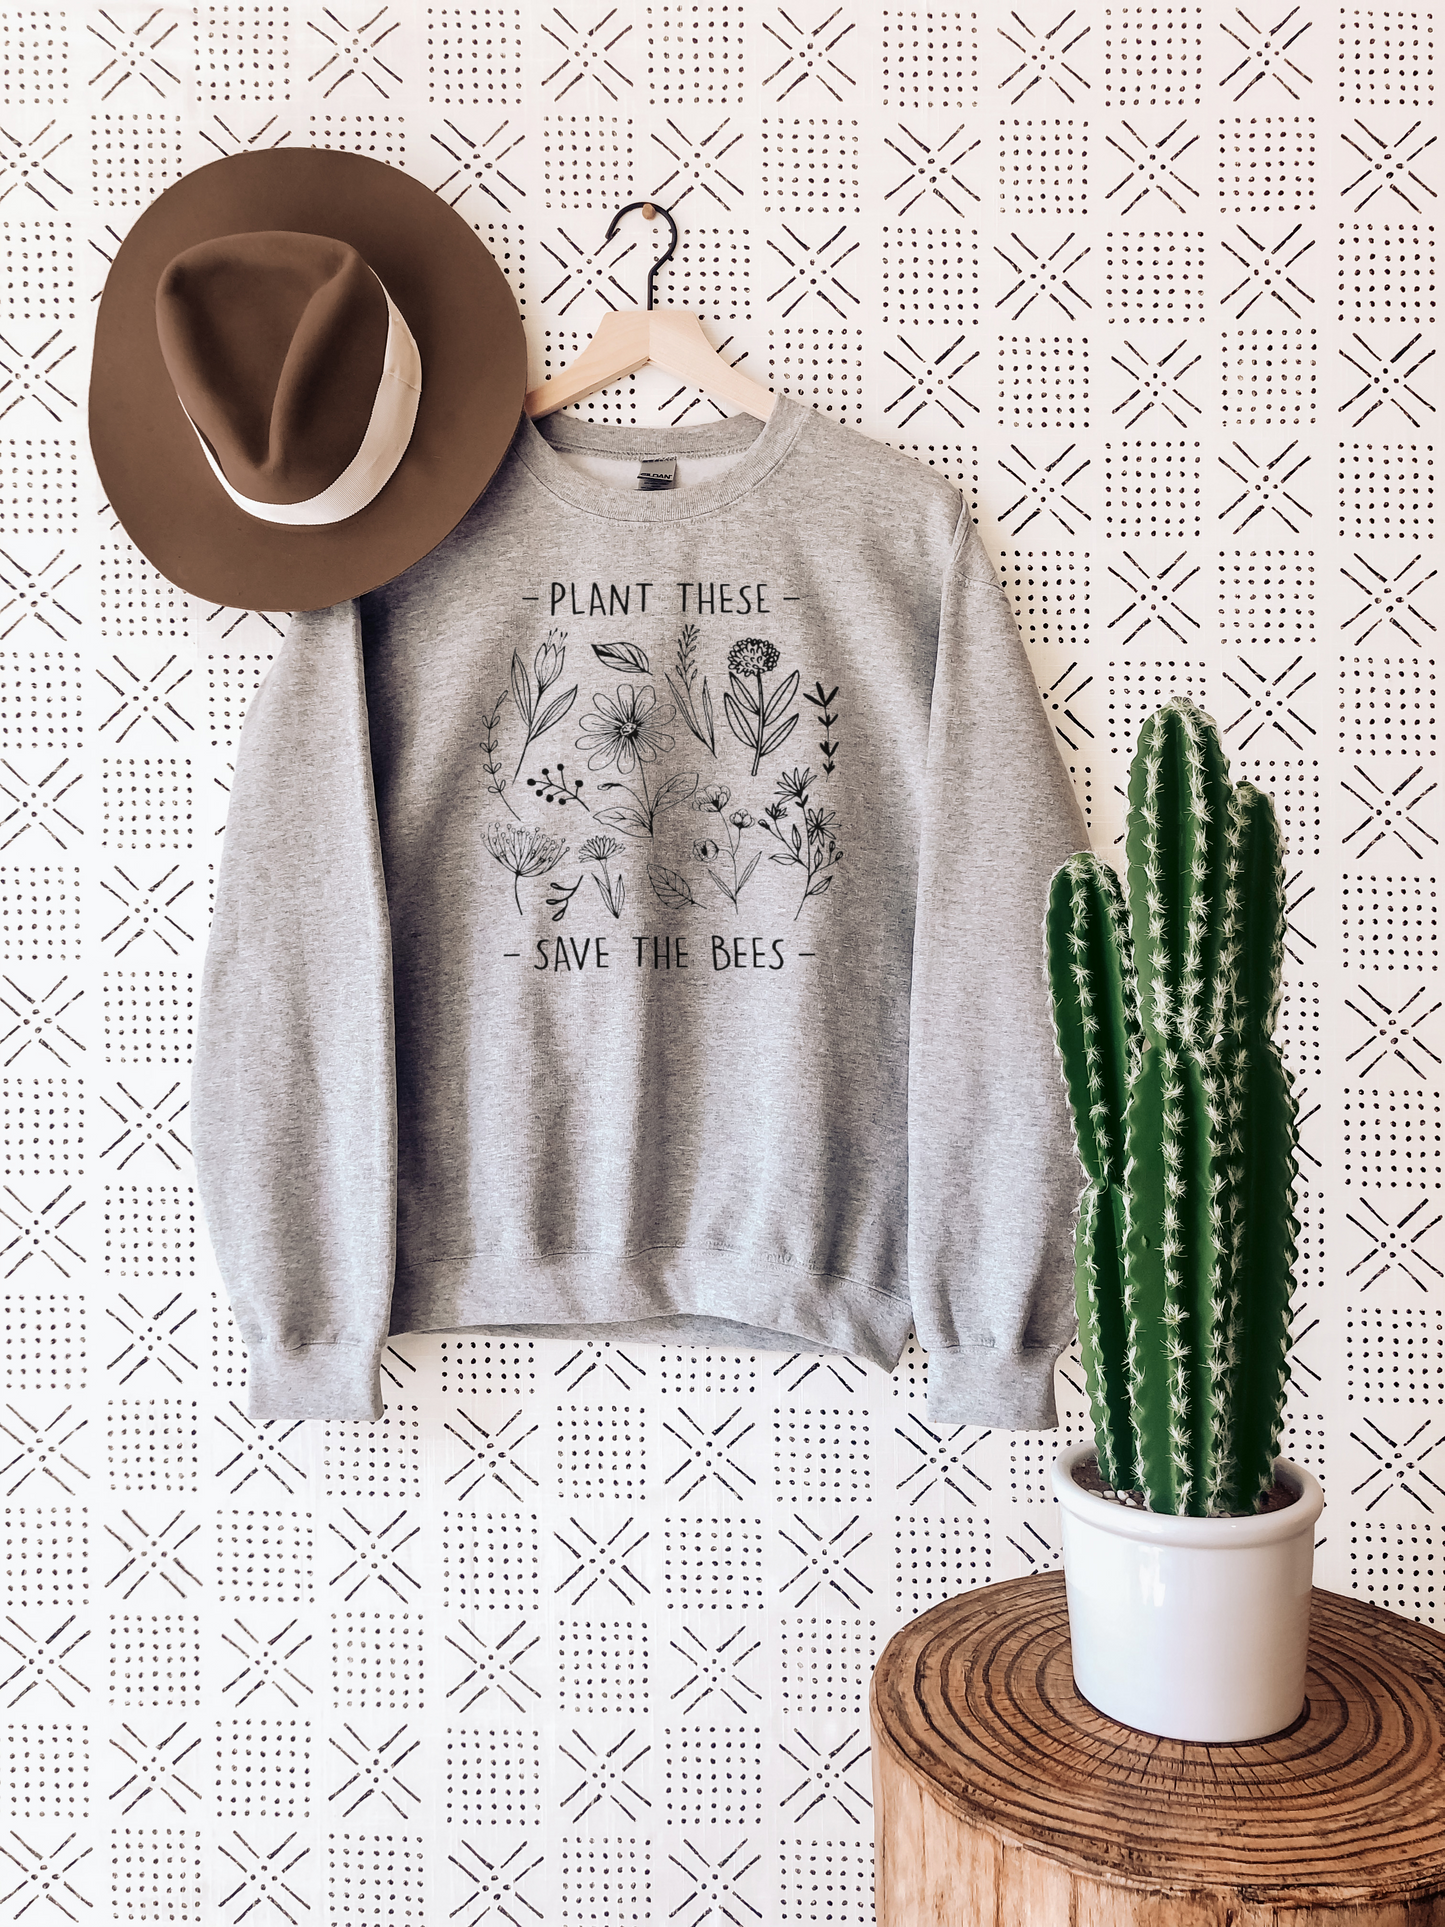 Plant These, Save The Bees Sweatshirt